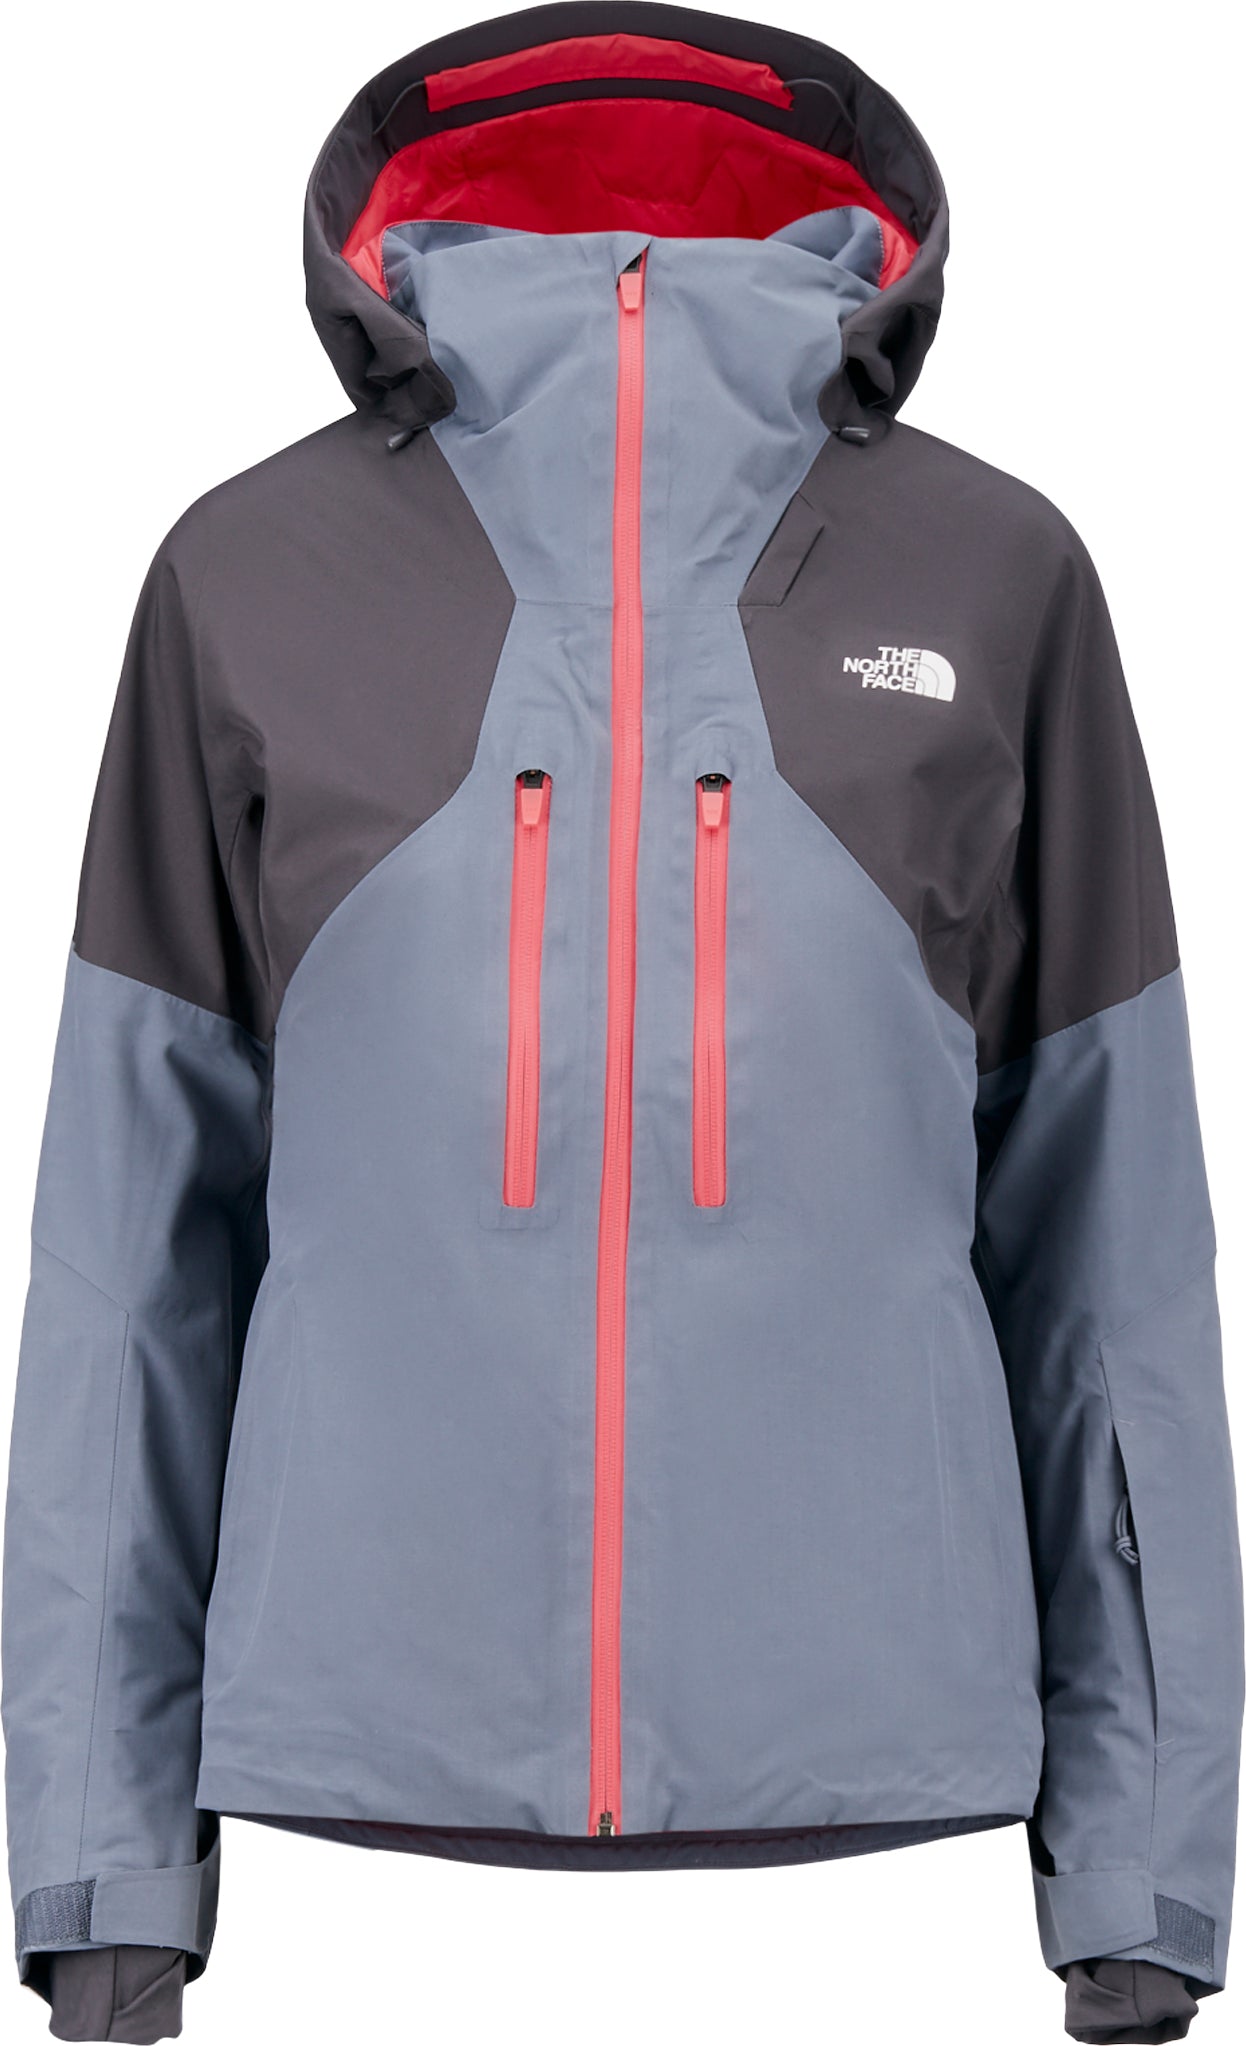 The North Face Powder Guide Jacket 